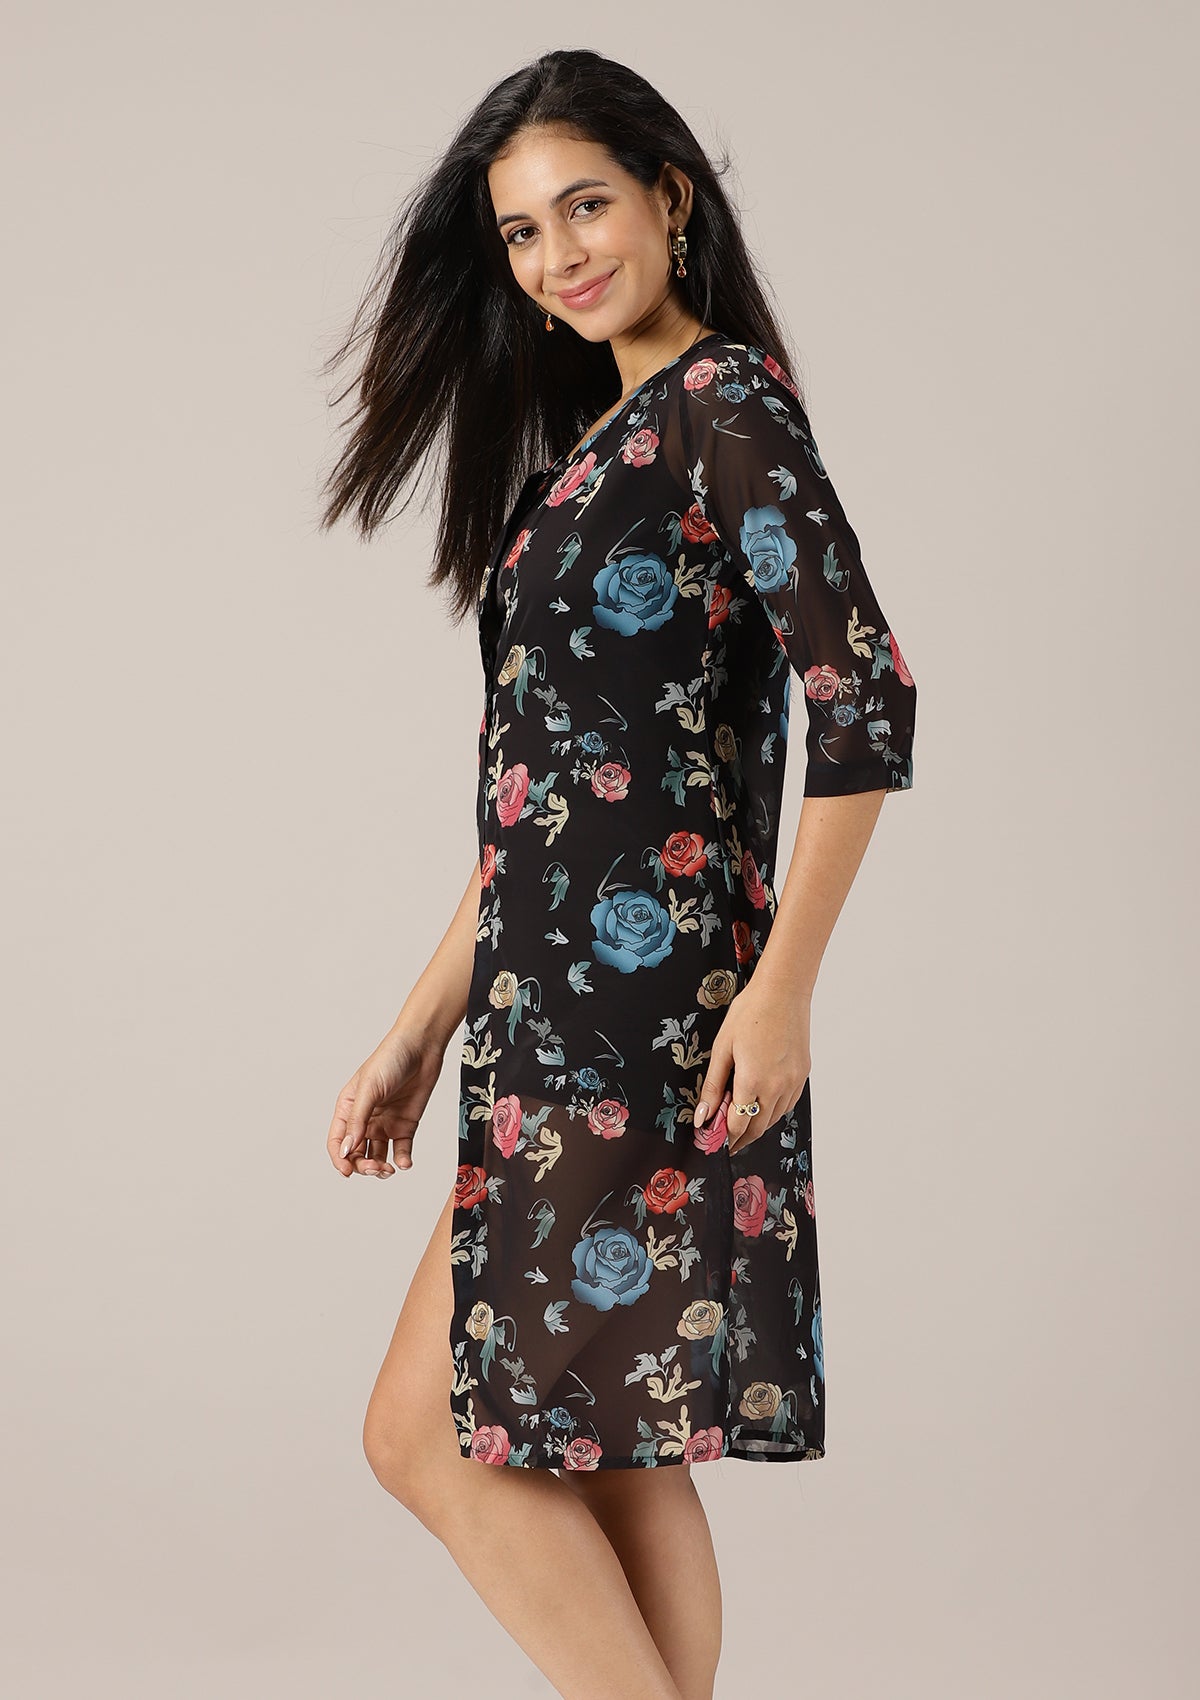 Black Rose - Floral Printed Two Piece Party Dress